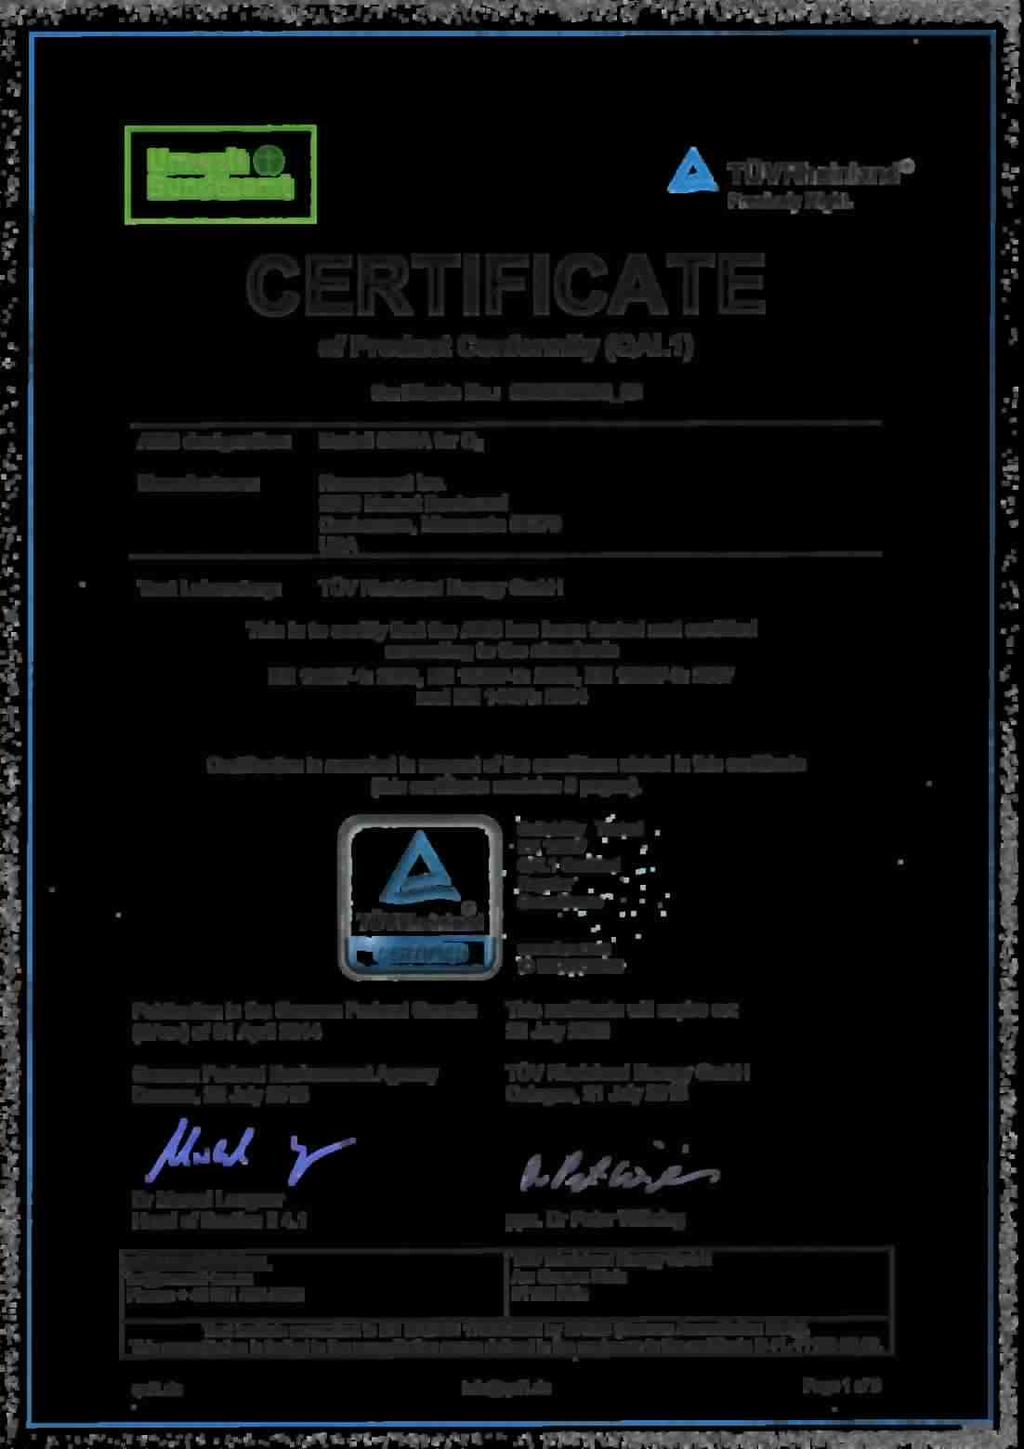 2009, EN 15267-3: 2007 and EN 14181: 2004 Certification is awarded in respect of the conditions stated in this certificate (this certificate contains s pages).